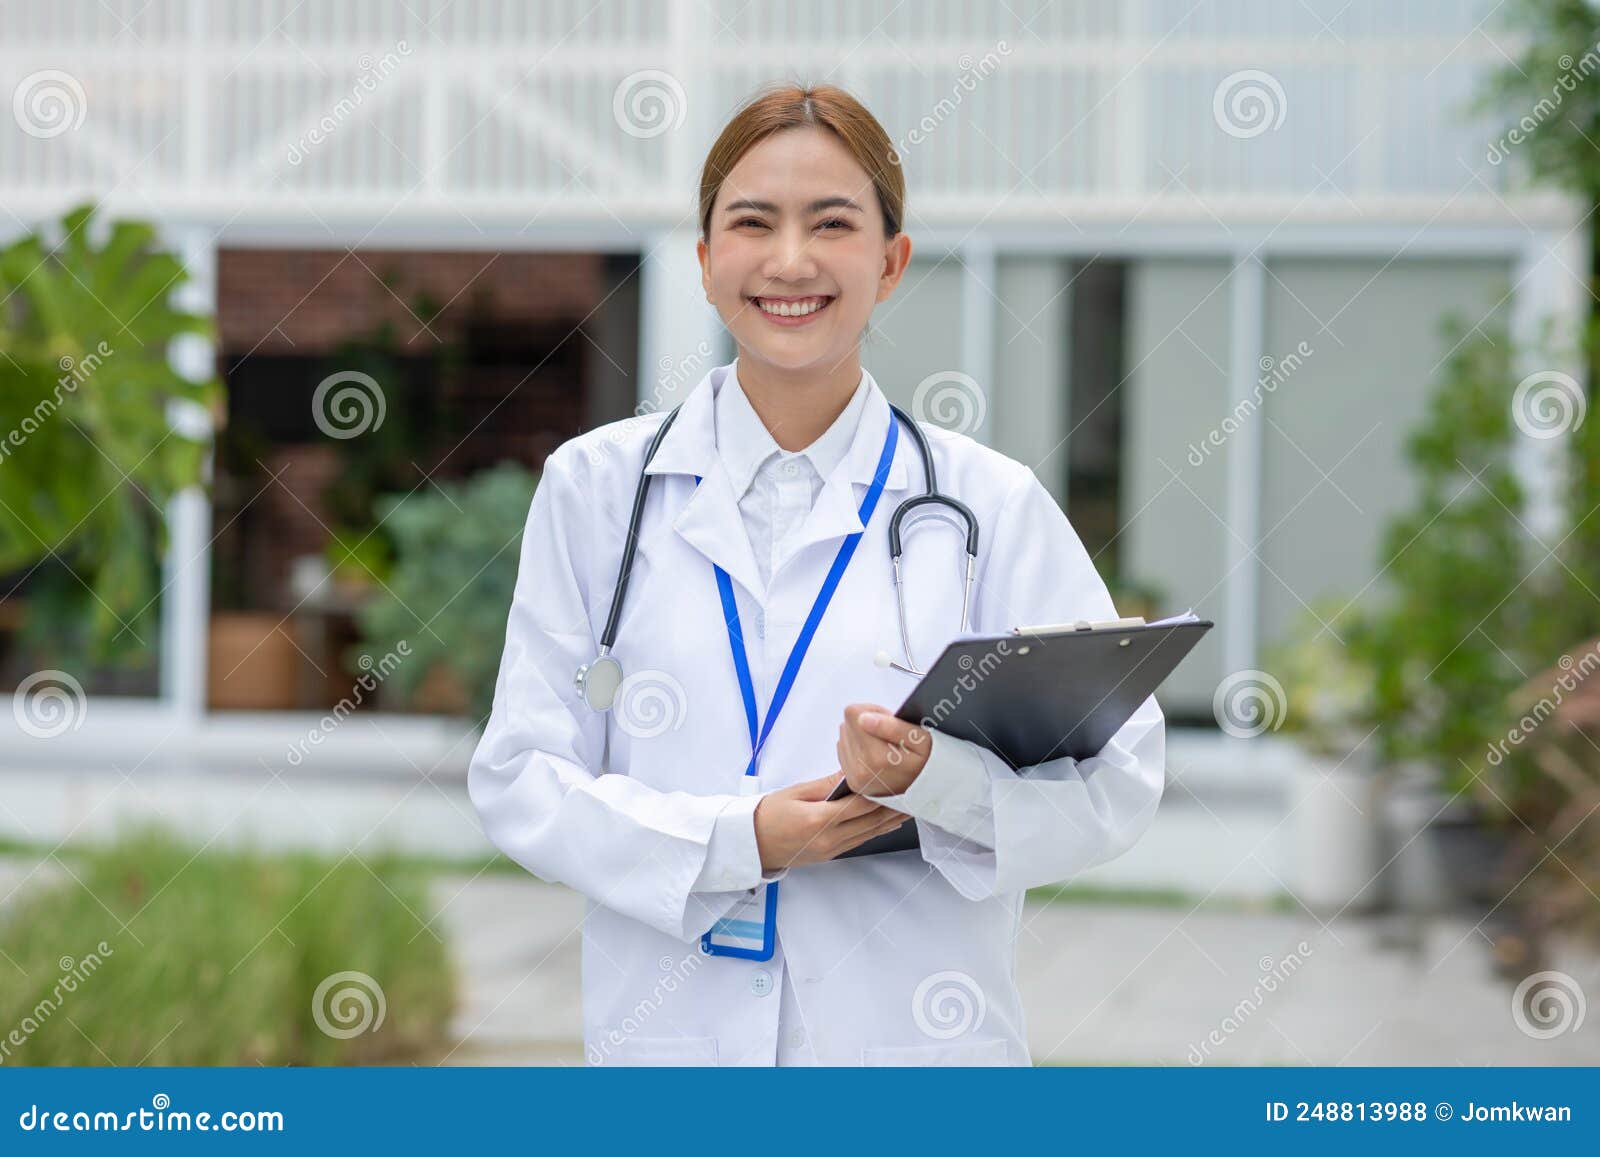 Asian Female Doctor with a Stethoscope Smile Looking at Camera. Doctor ...